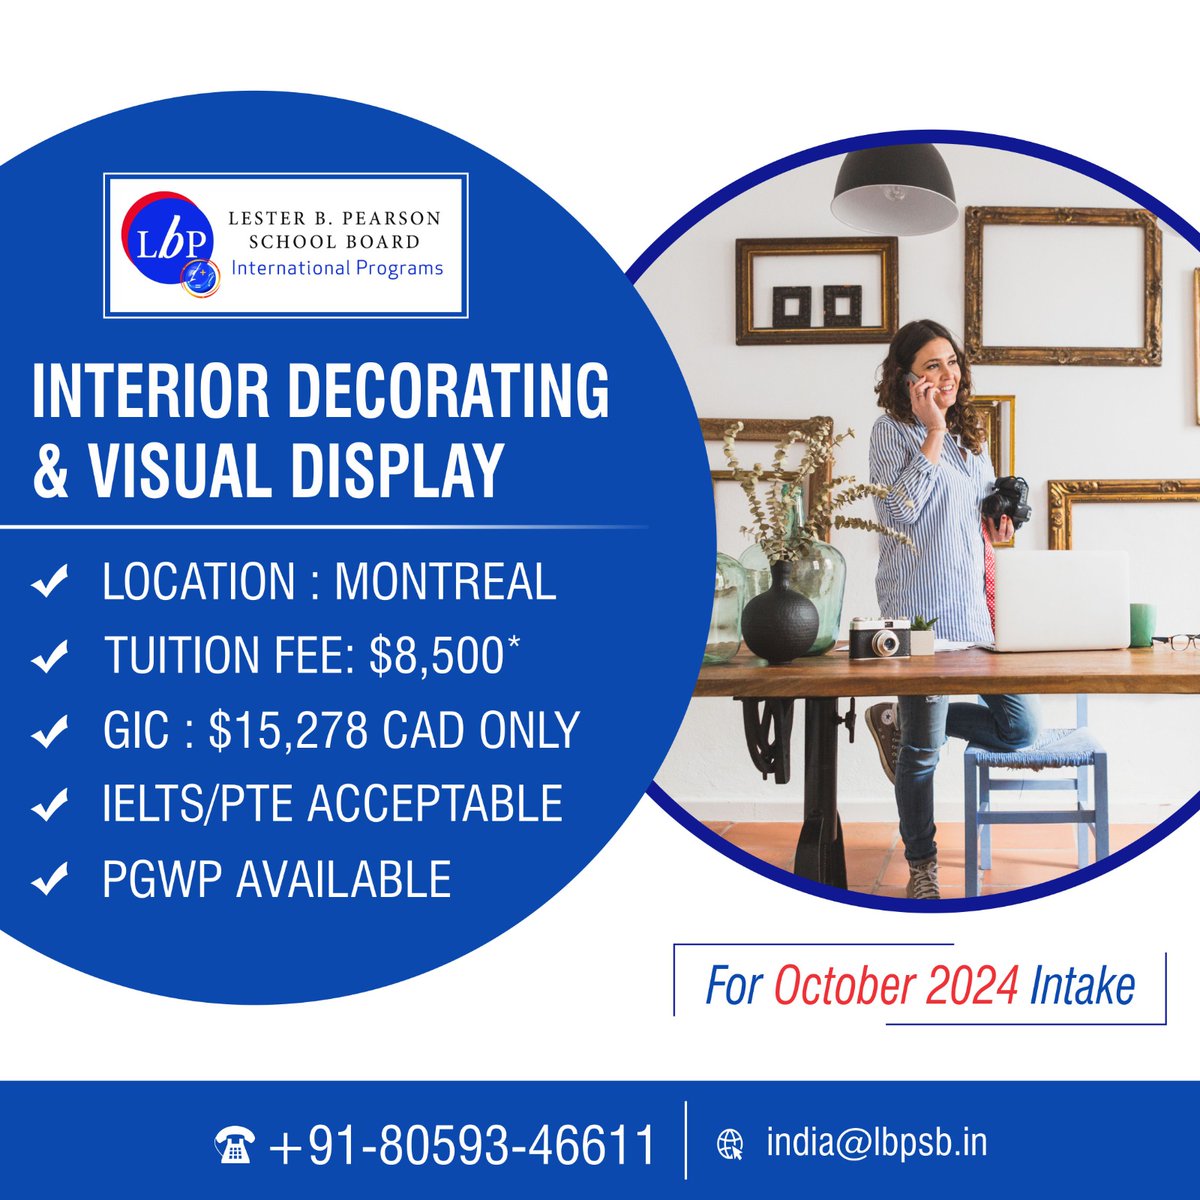 📷 Lester B Pearson School Board

📷PROGRAM: Interior Decorating And Visual Display
📷LOCATION: MONTREAL
📷TUITION FEE: $8500*
📷GIC: $15278 CAD Only
📷IELTS/PTE ACCEPTABLE
📷PGWP AVAILABLE

𝐑𝐄𝐒𝐄𝐑𝐕𝐄 𝐘𝐎𝐔𝐑 𝐒𝐄𝐀𝐓𝐒 𝐍𝐎𝐖📷

📷𝐀𝐏𝐏𝐋𝐘 𝐓𝐎𝐃𝐀𝐘📷